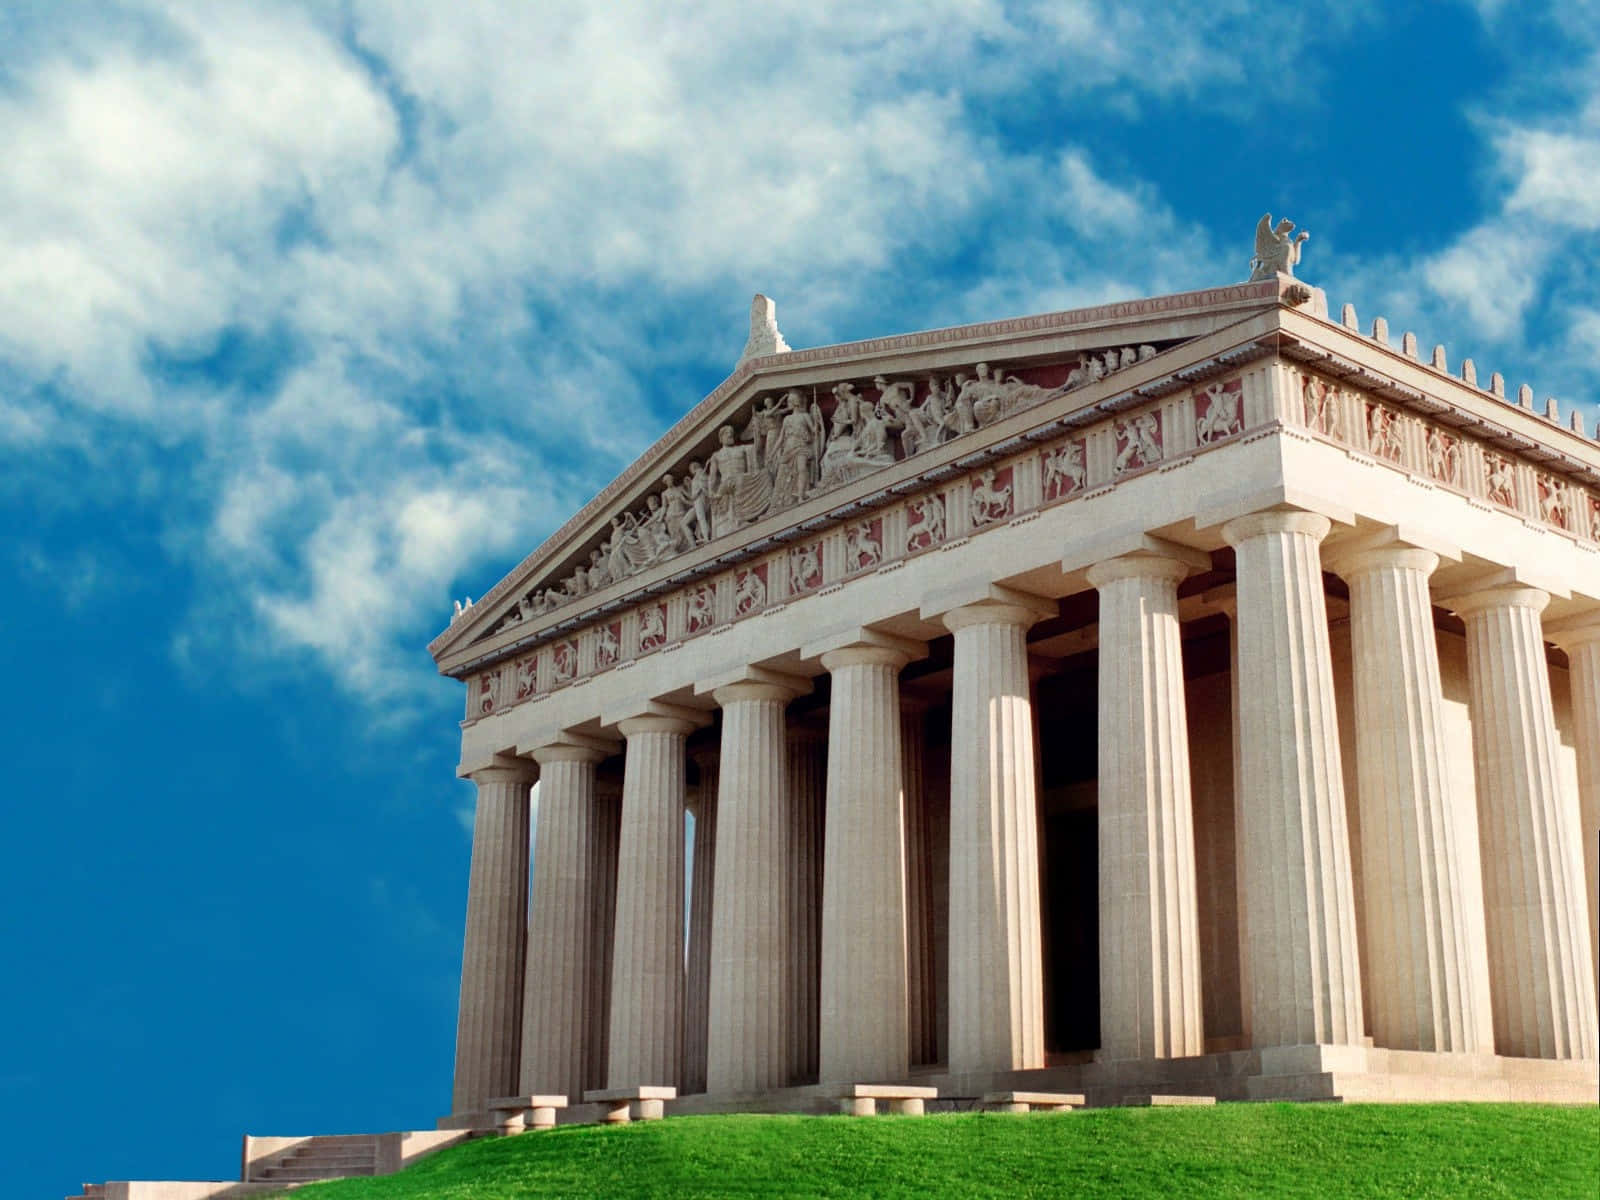 A majestic view of a classical painted building atop a hill